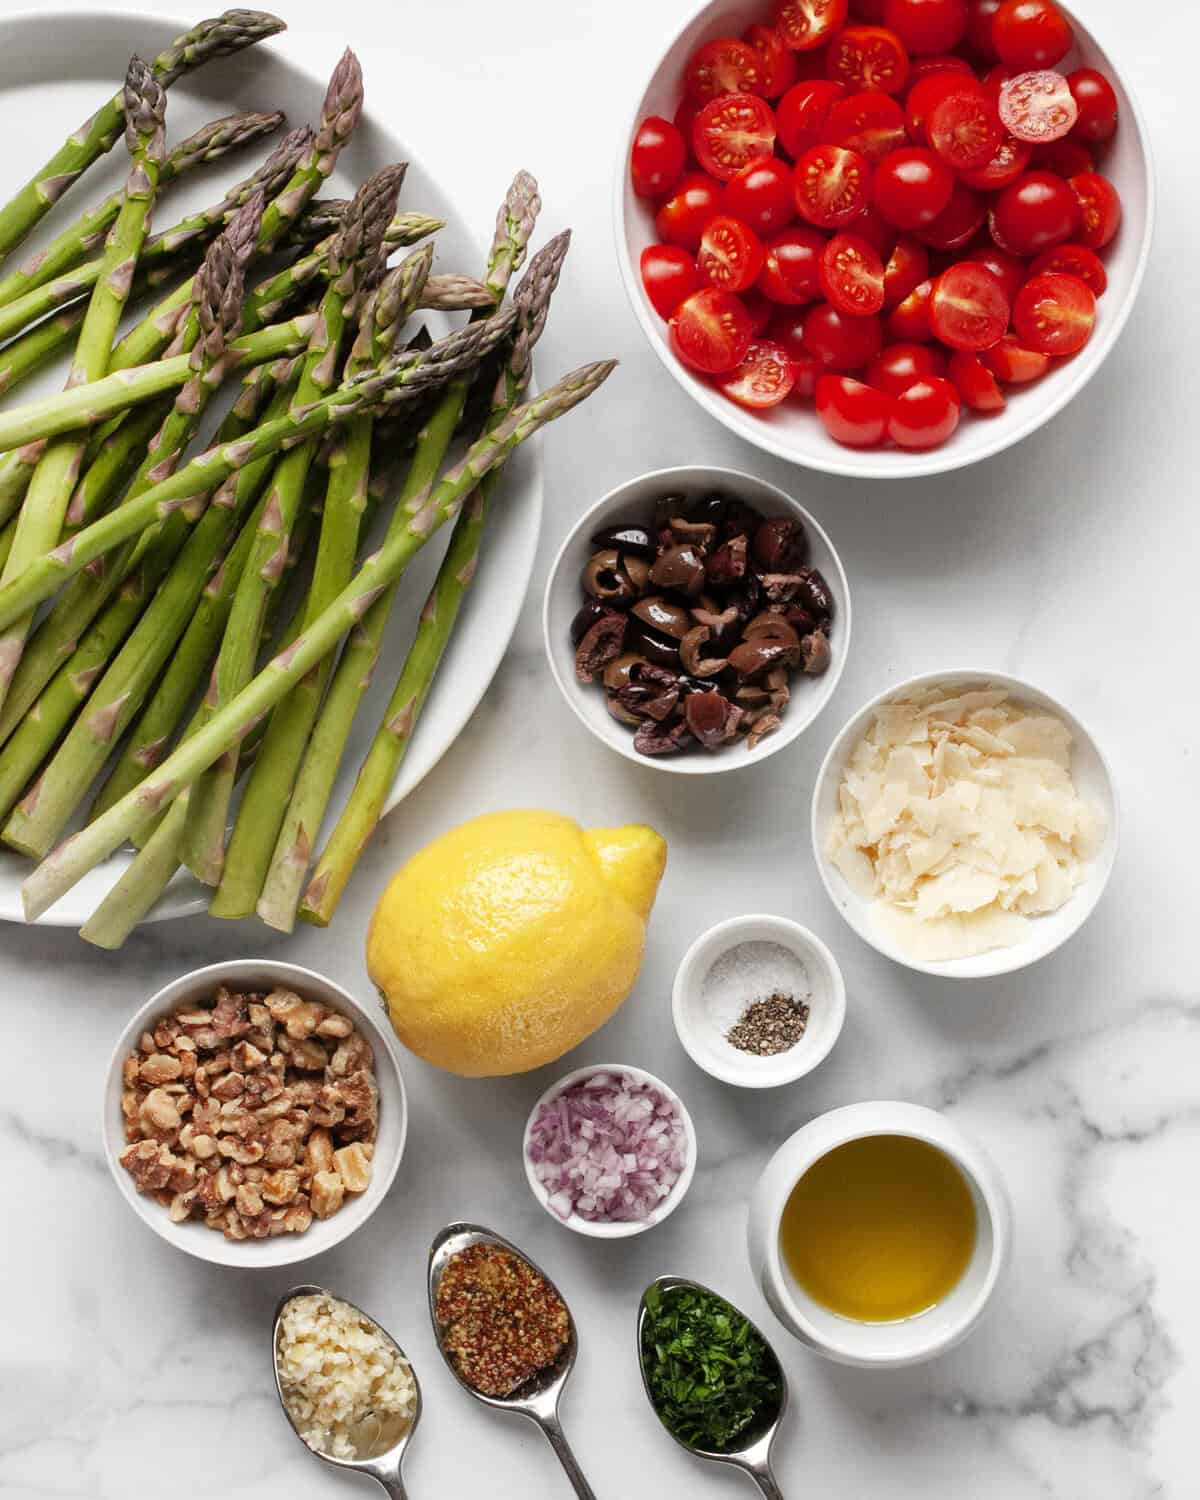 Ingredients including asparagus, tomatoes, olives, walnuts, parmesan, parsley, garlic, mustard, olive oil and lemon.